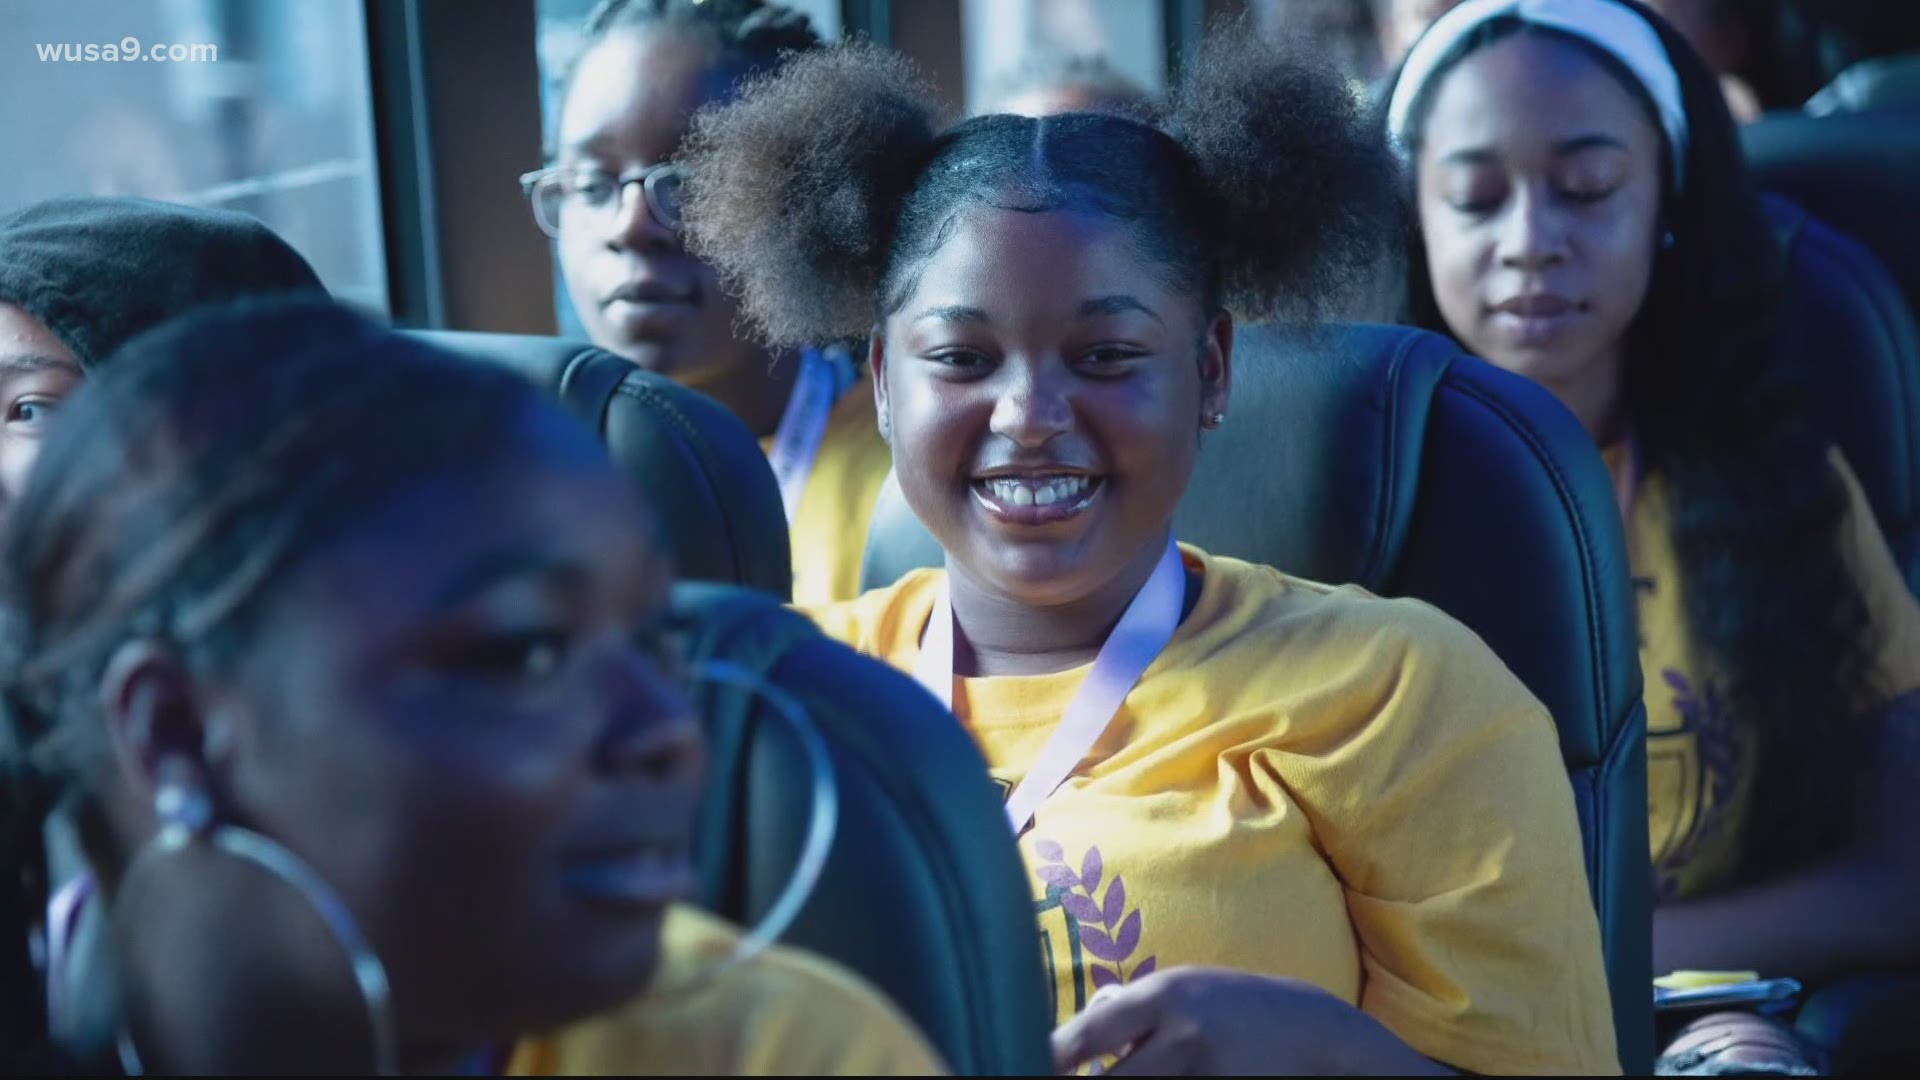 Black Girl Tribe has been awarded a $100,000 grant from Nike to close the gap in sports for Black girls.